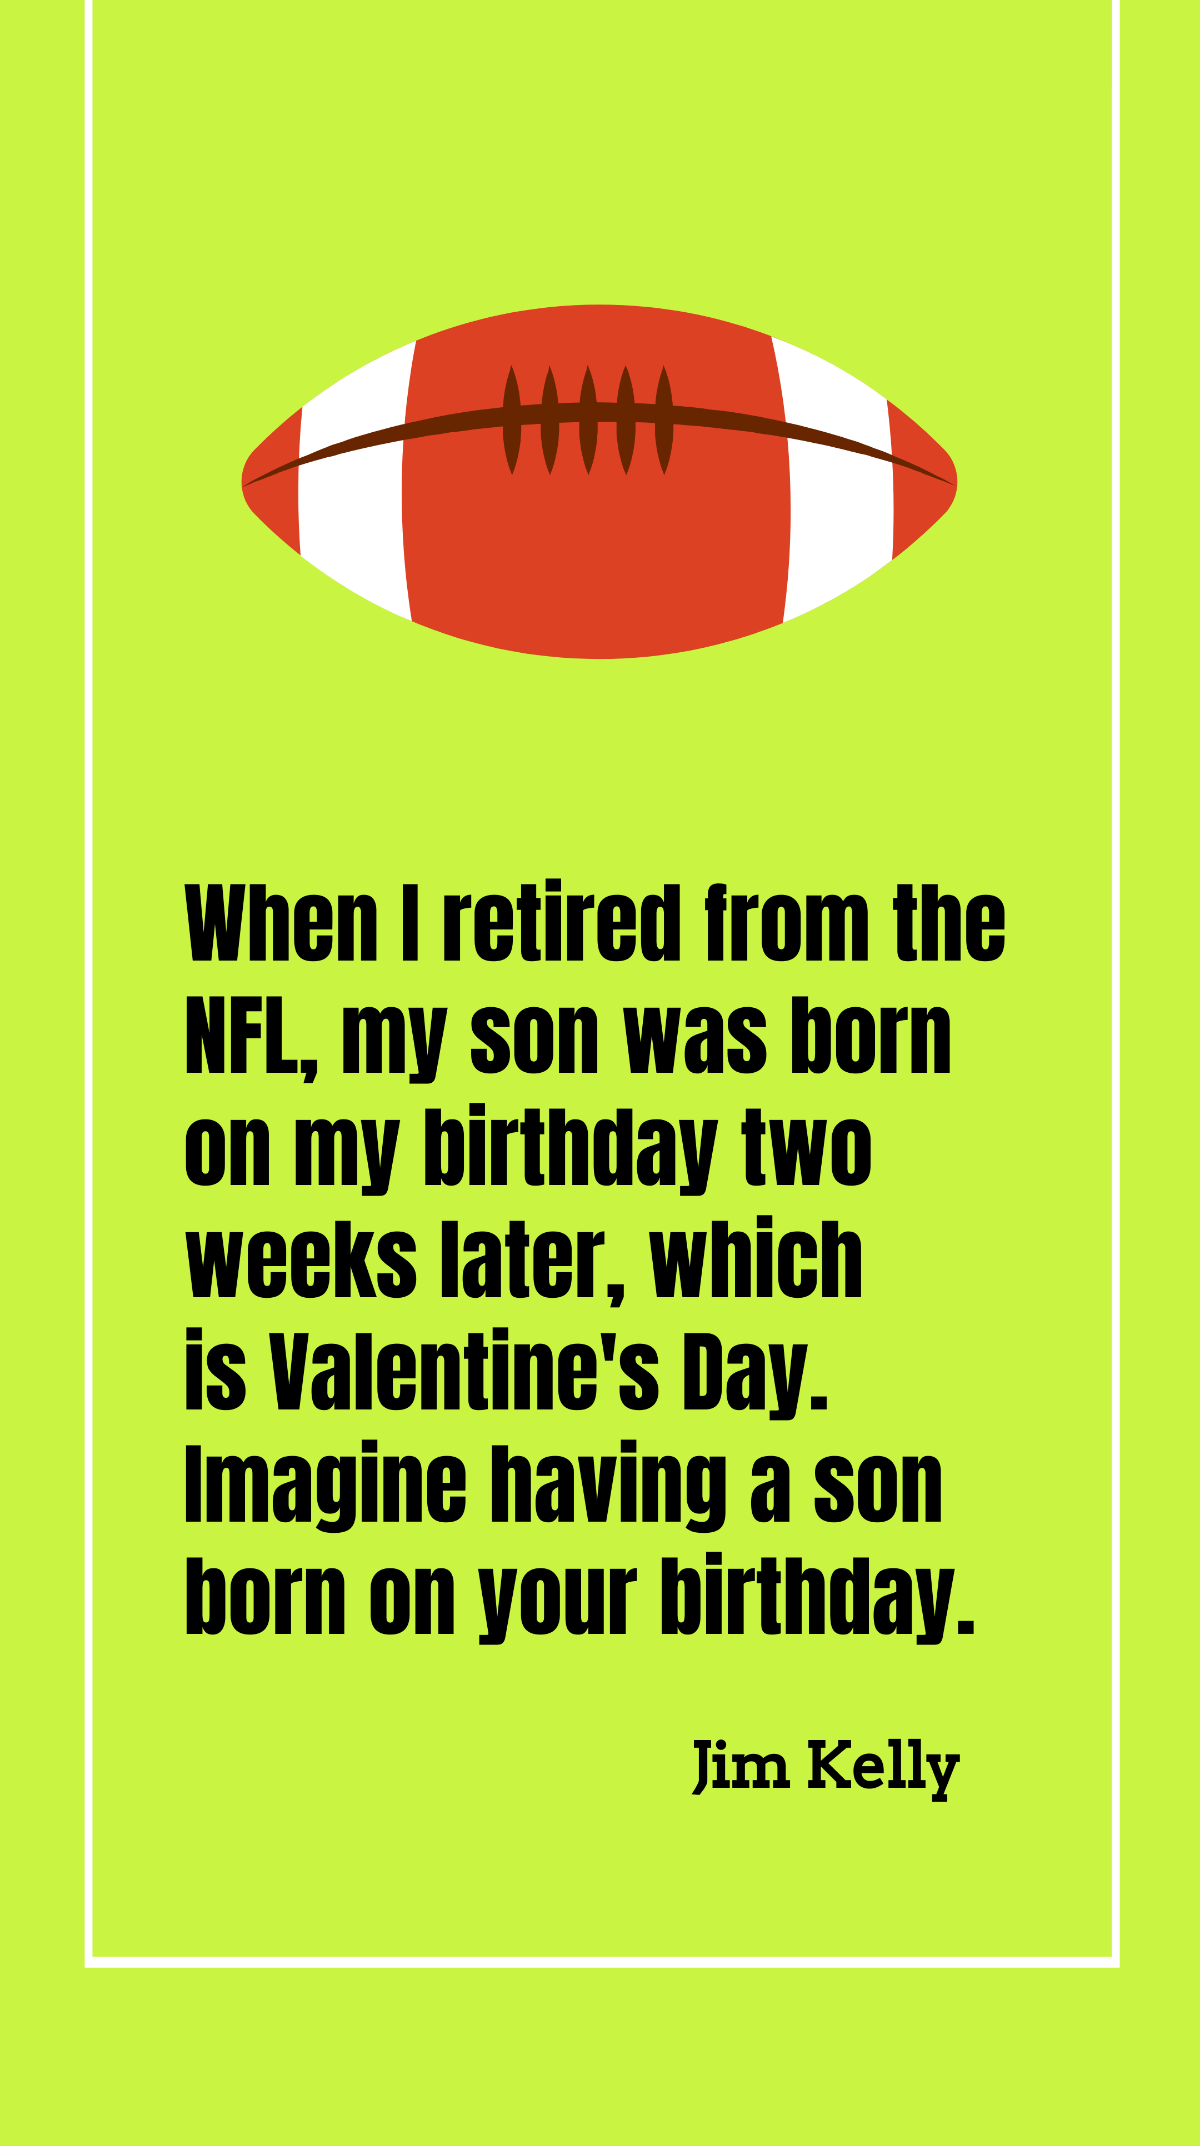 Jim Kelly - When I retired from the NFL, my son was born on my birthday two weeks later, which is Valentine's Day. Imagine having a son born on your birthday.